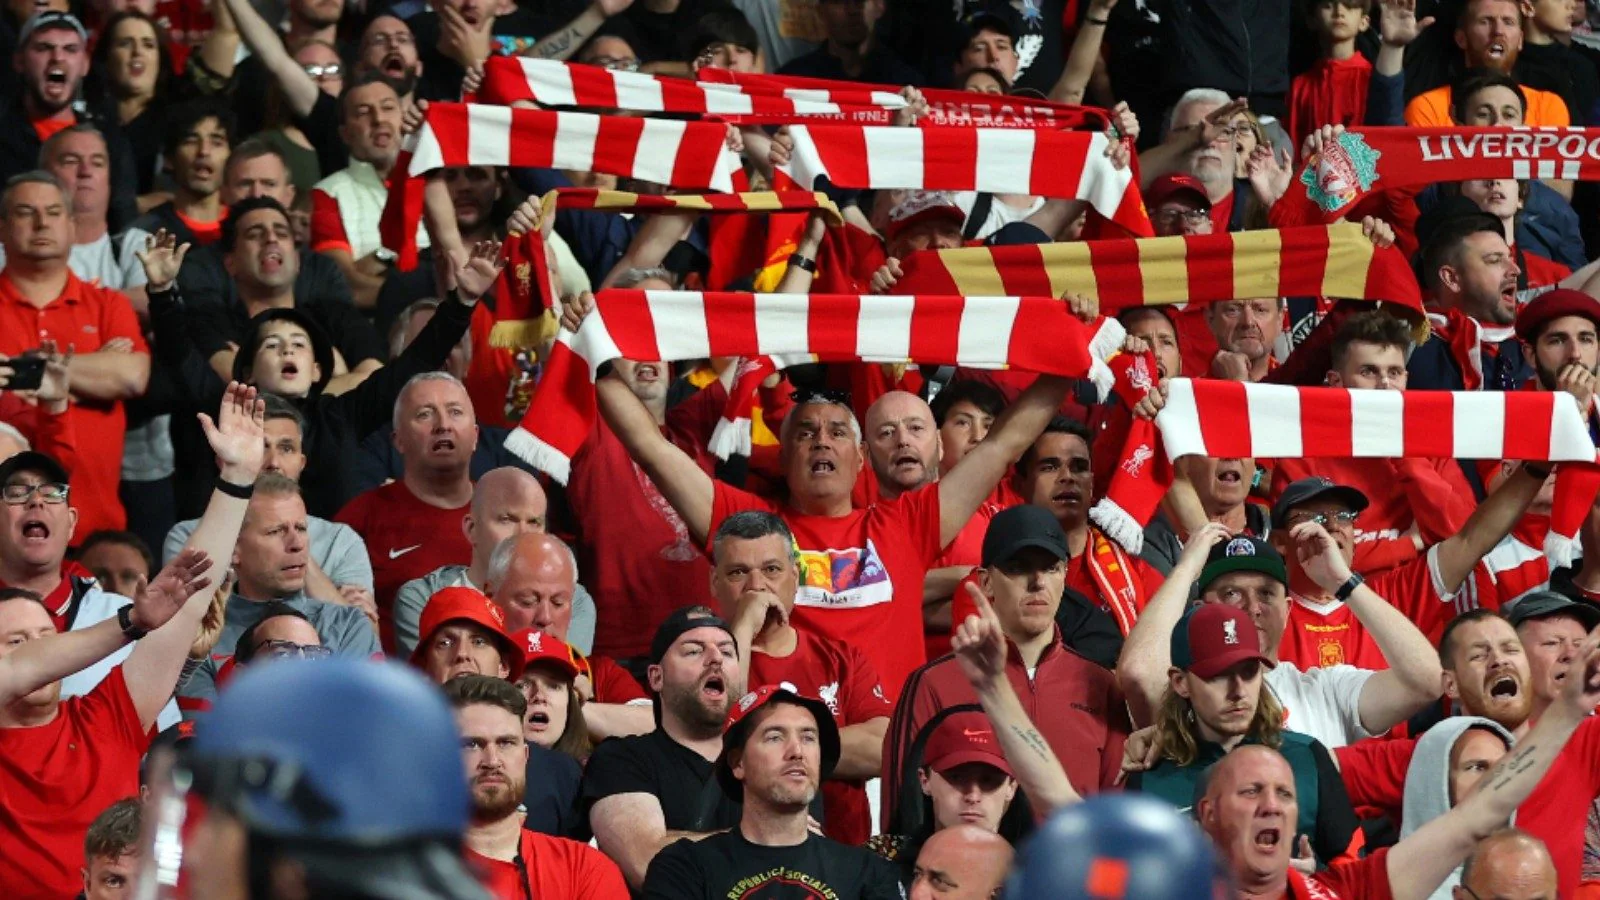 Liverpool Fan Group React to Enquiry Report on Champions League Final